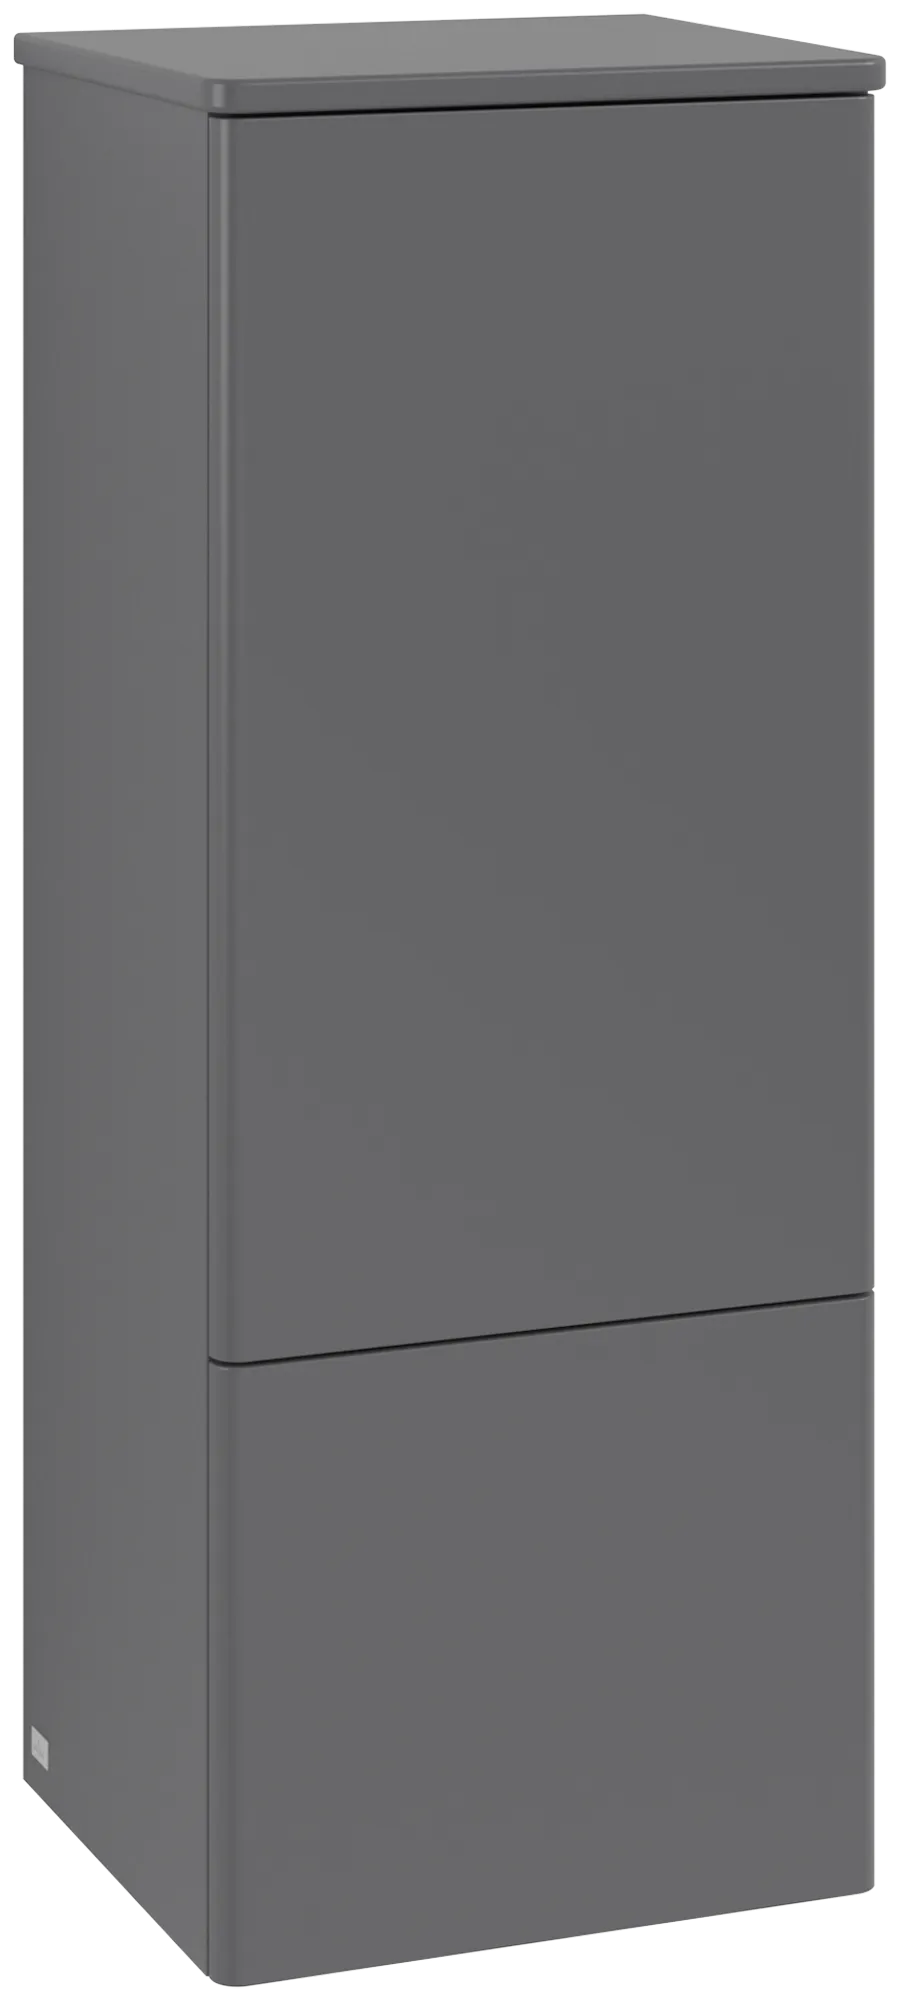 Obrázek VILLEROY BOCH Antao Medium-height cabinet, with lighting, 1 door, 414 x 1039 x 356 mm, Front without structure, Anthracite Matt Lacquer / Anthracite Matt Lacquer #L44000GK